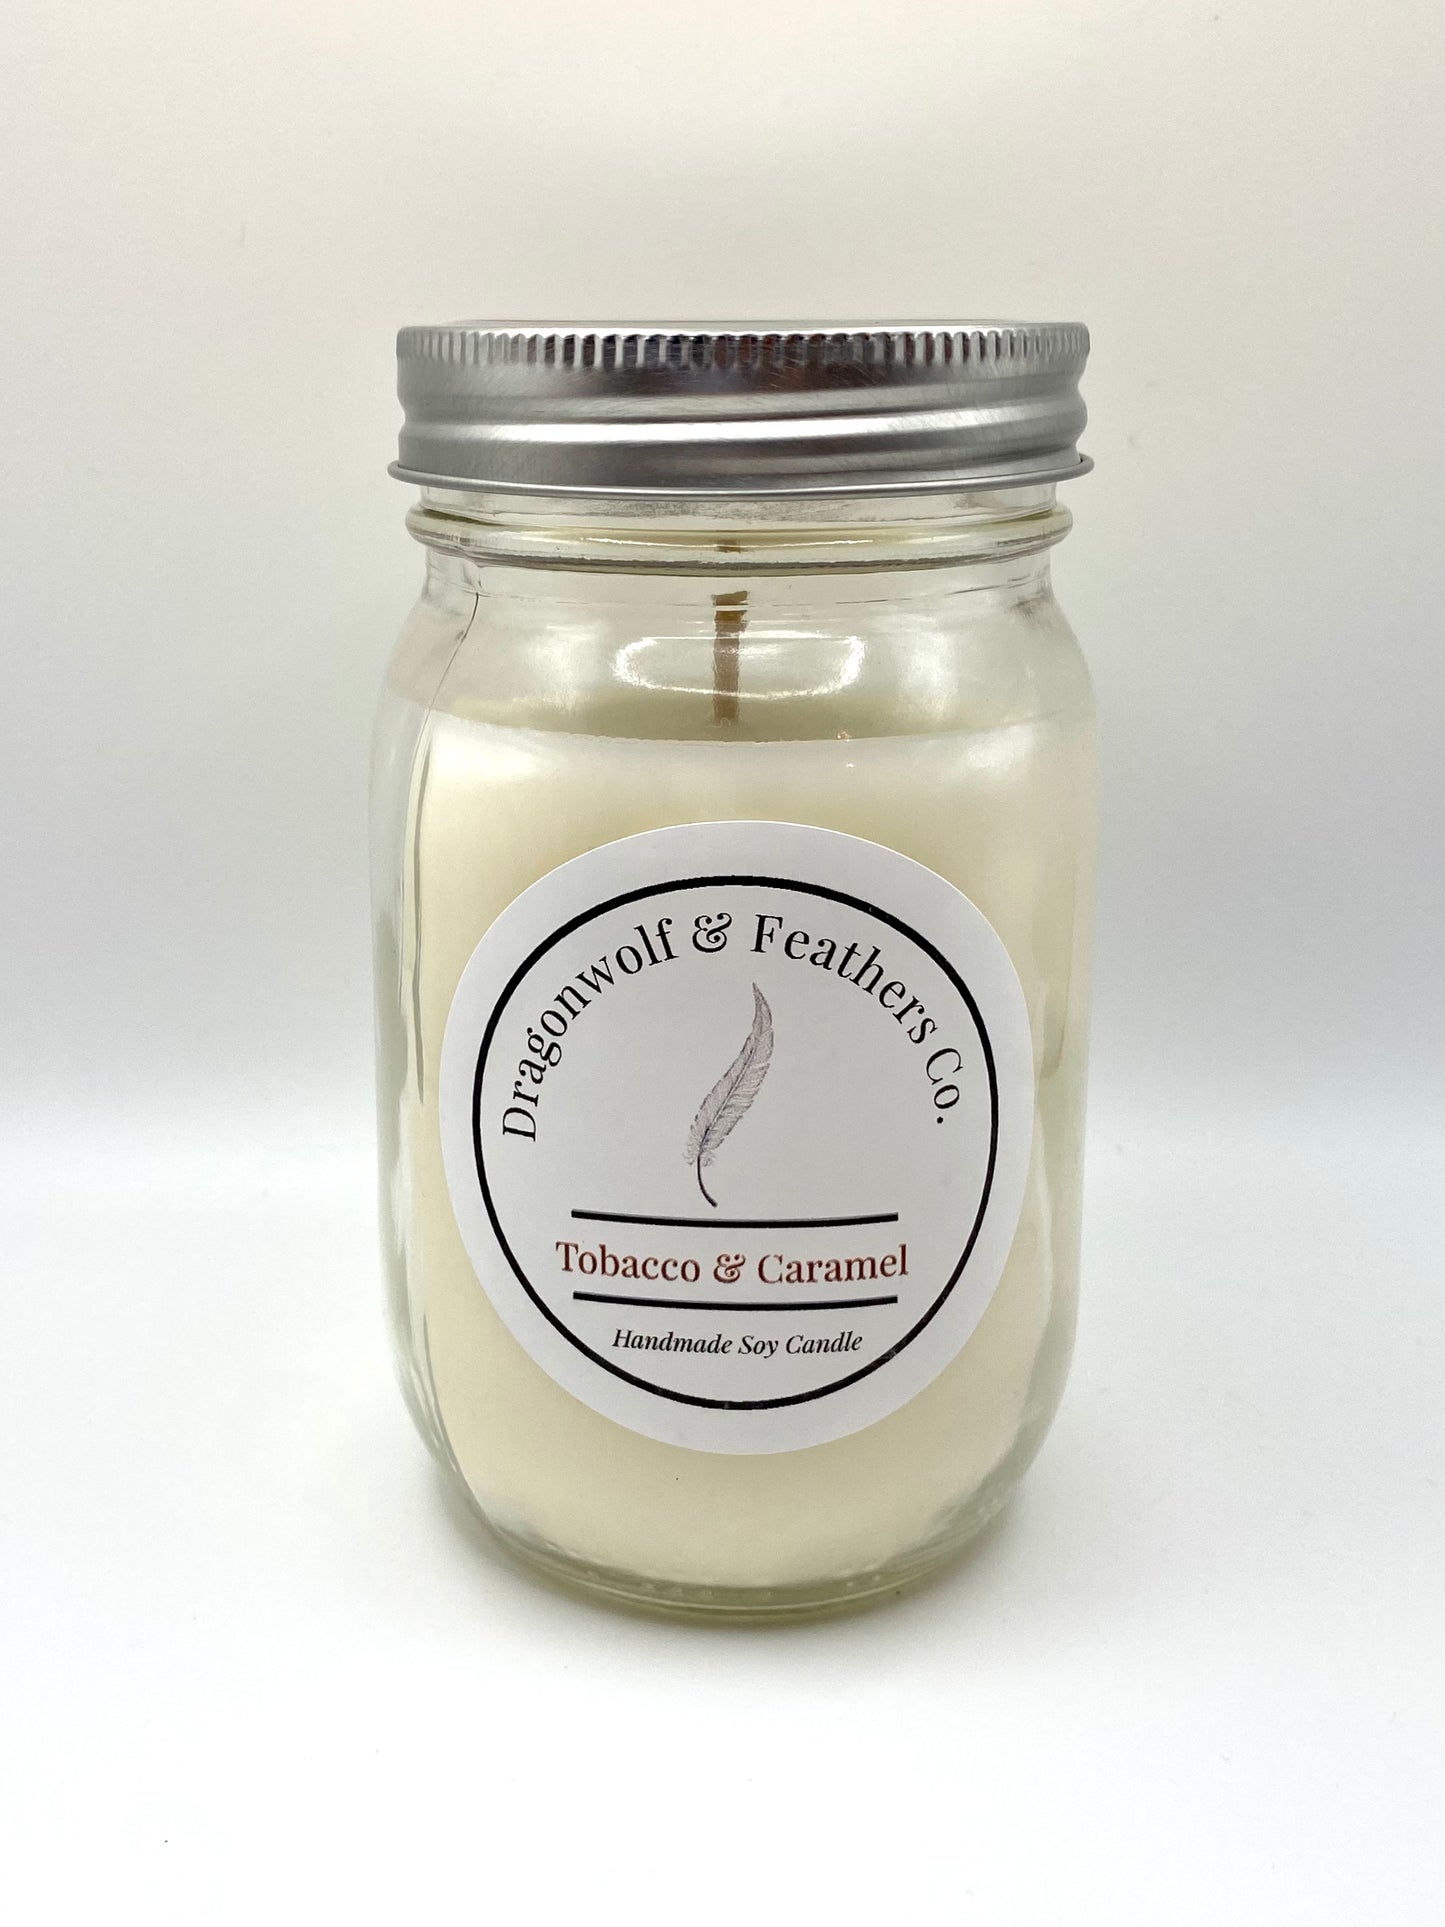 Dragonwolf & Feathers Co. Handmade Soy Candle - Tobacco & Caramel